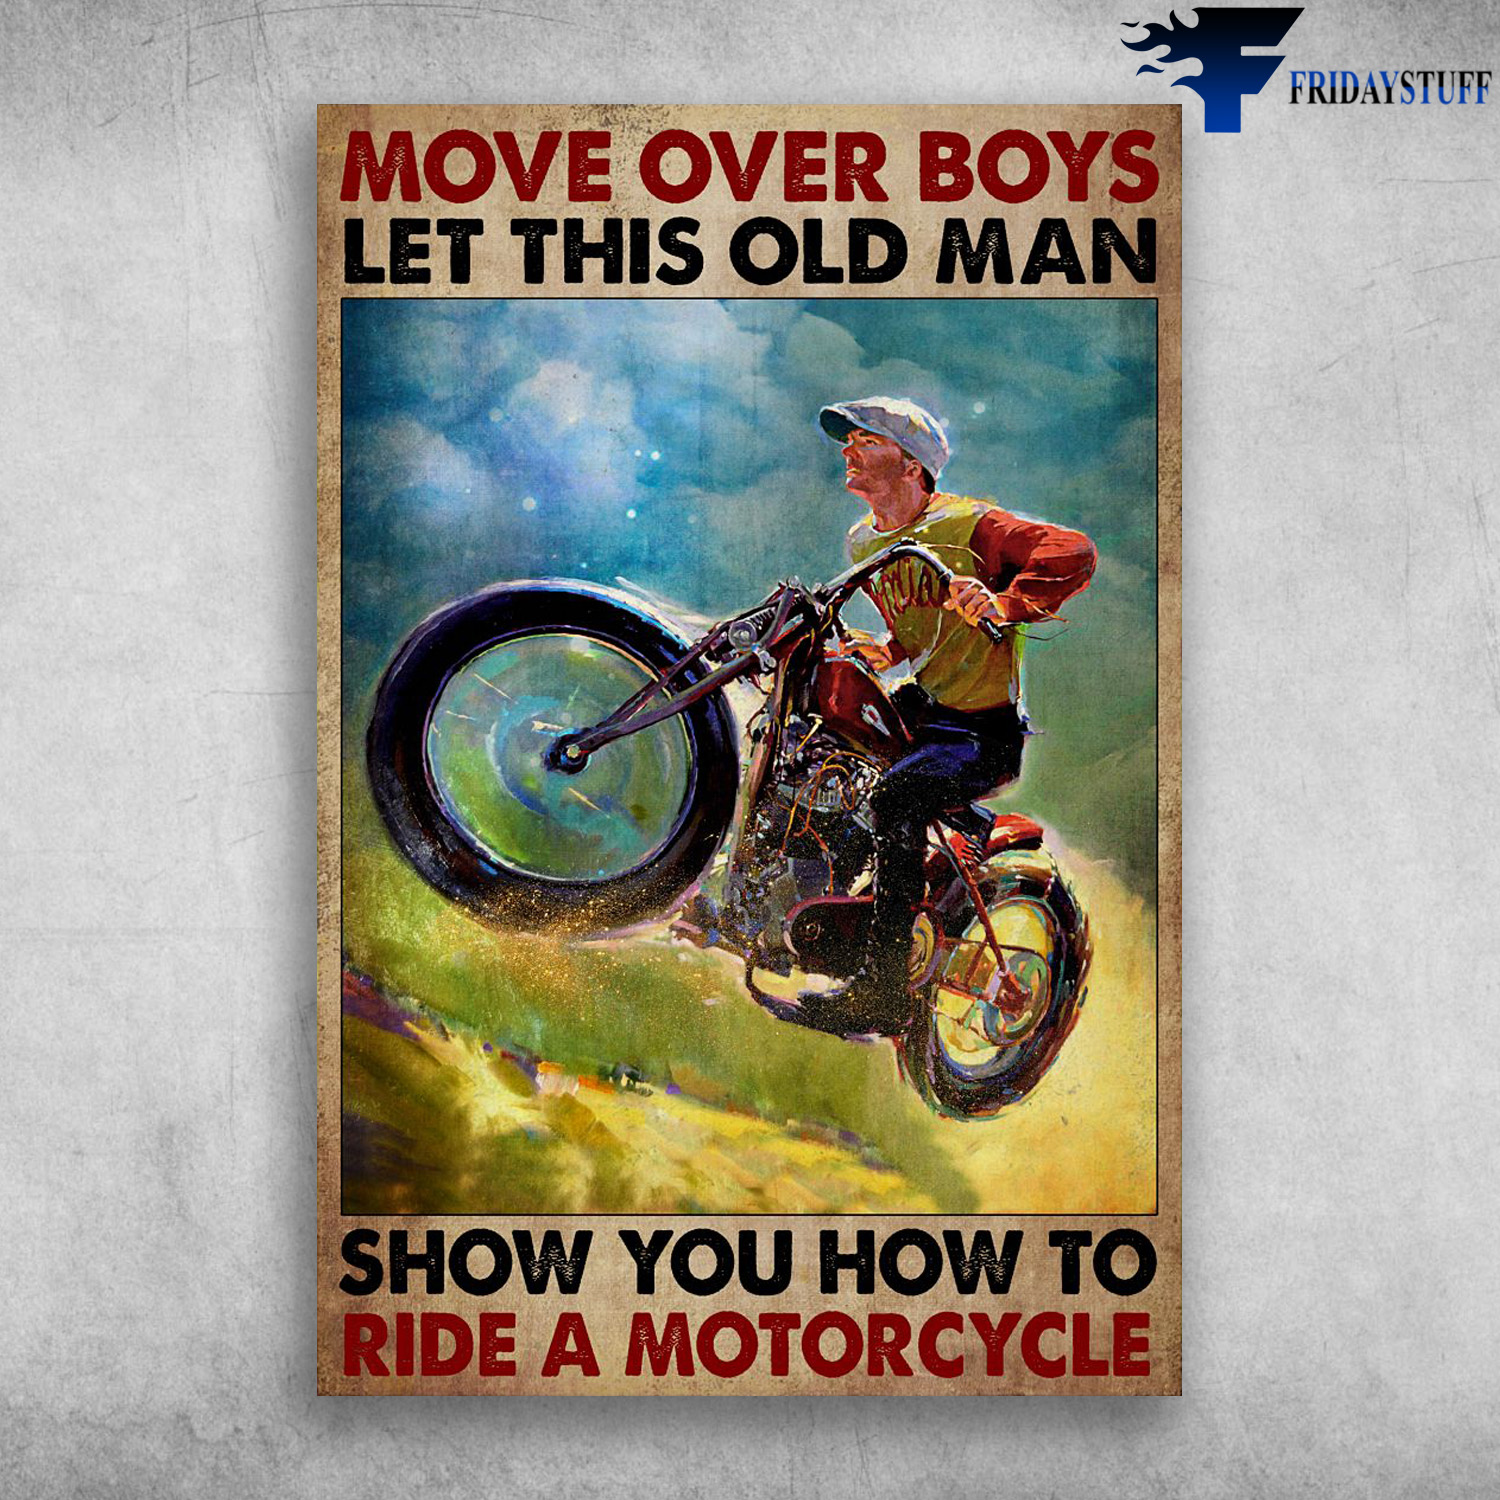 Man Riding Motorcycle - Move Over Boys, Let This Old Man, Show You How To Ride A Motorcycle